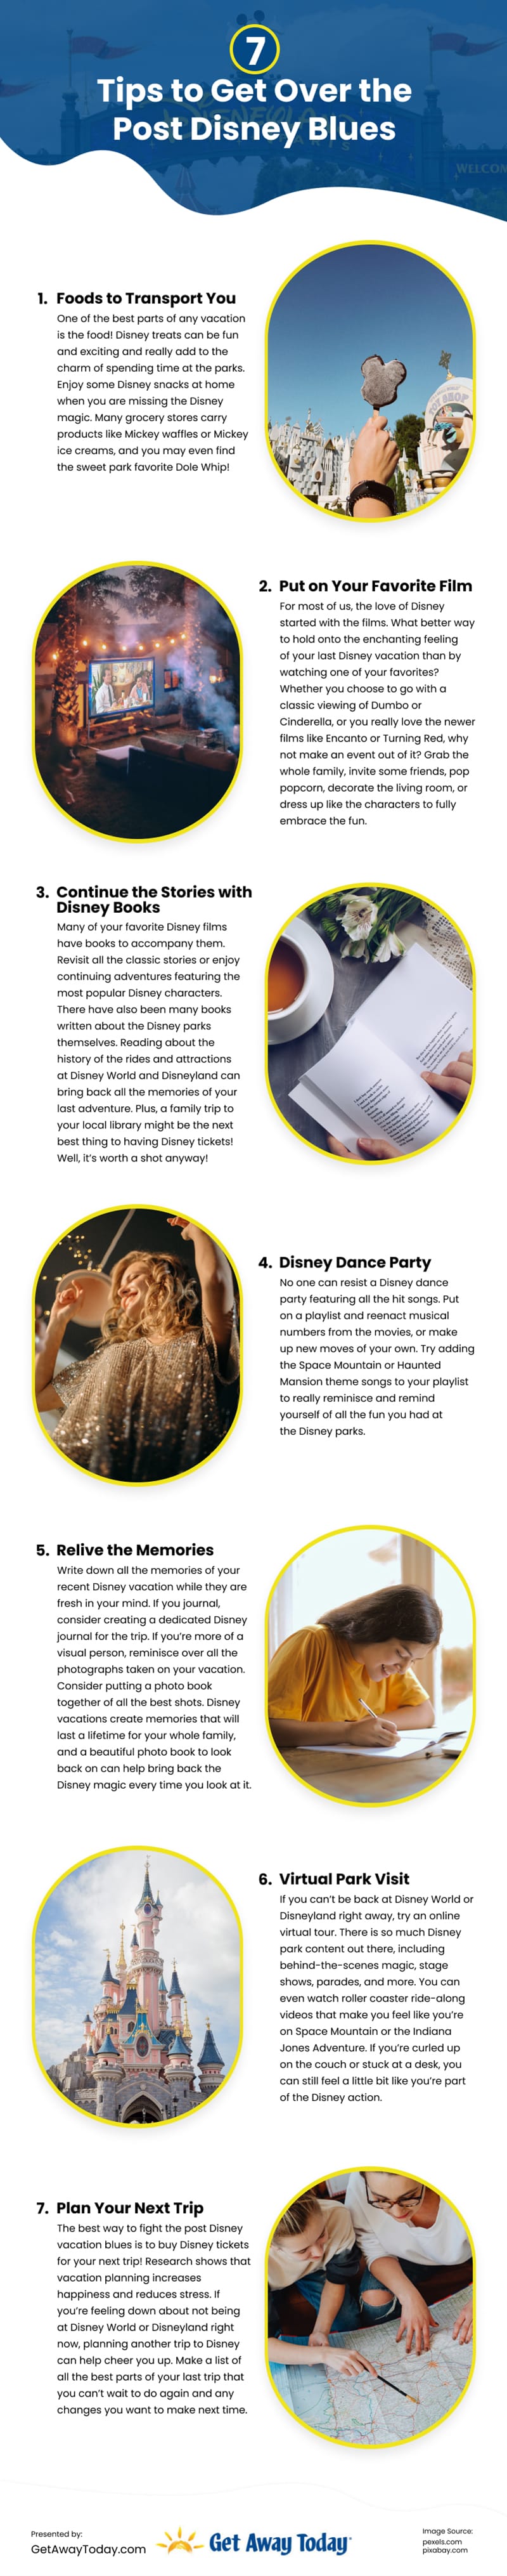 7 Tips to Get Over the Disney Blues || Get Away Today